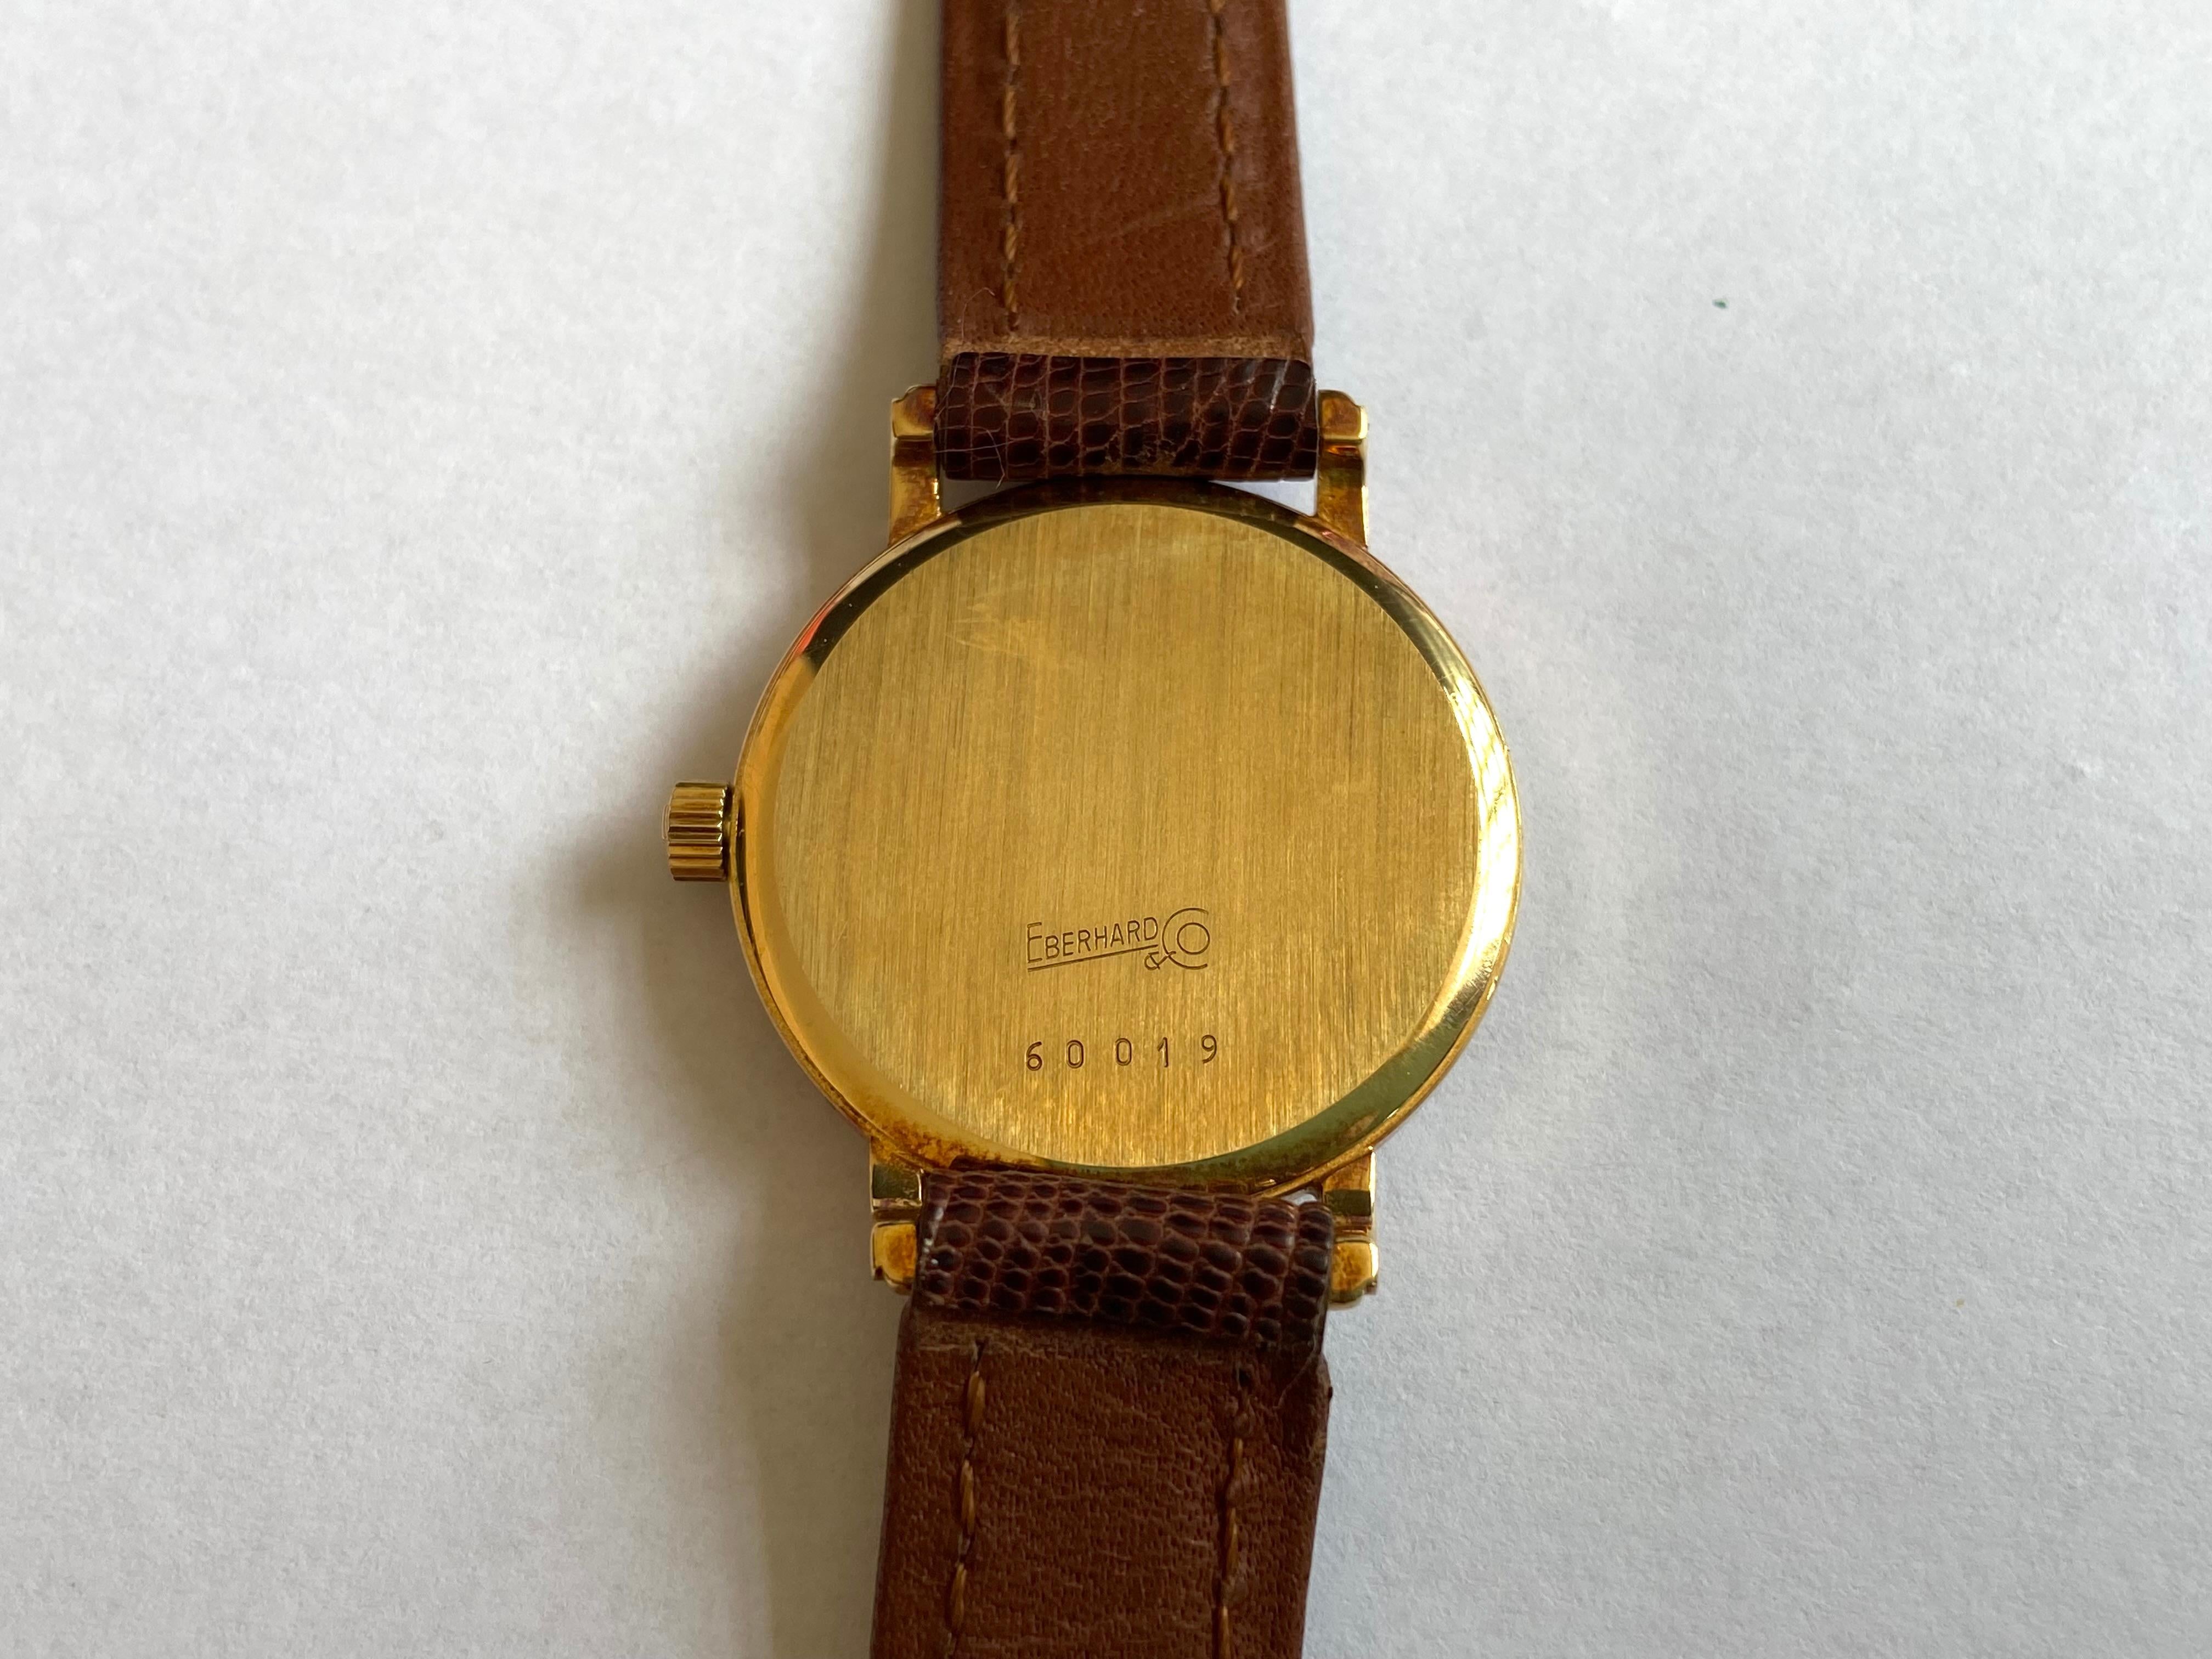 18 kt gold watch, Eberhard, women's model, vintage, 90s.
Quartz movement, solid gold case, 26 mm wide, day at 3 o'clock, white dial, Roman indexes. Gross weight approx. 14 grams. Little used. Working. Guarantee of the time. I ship in an elegant case